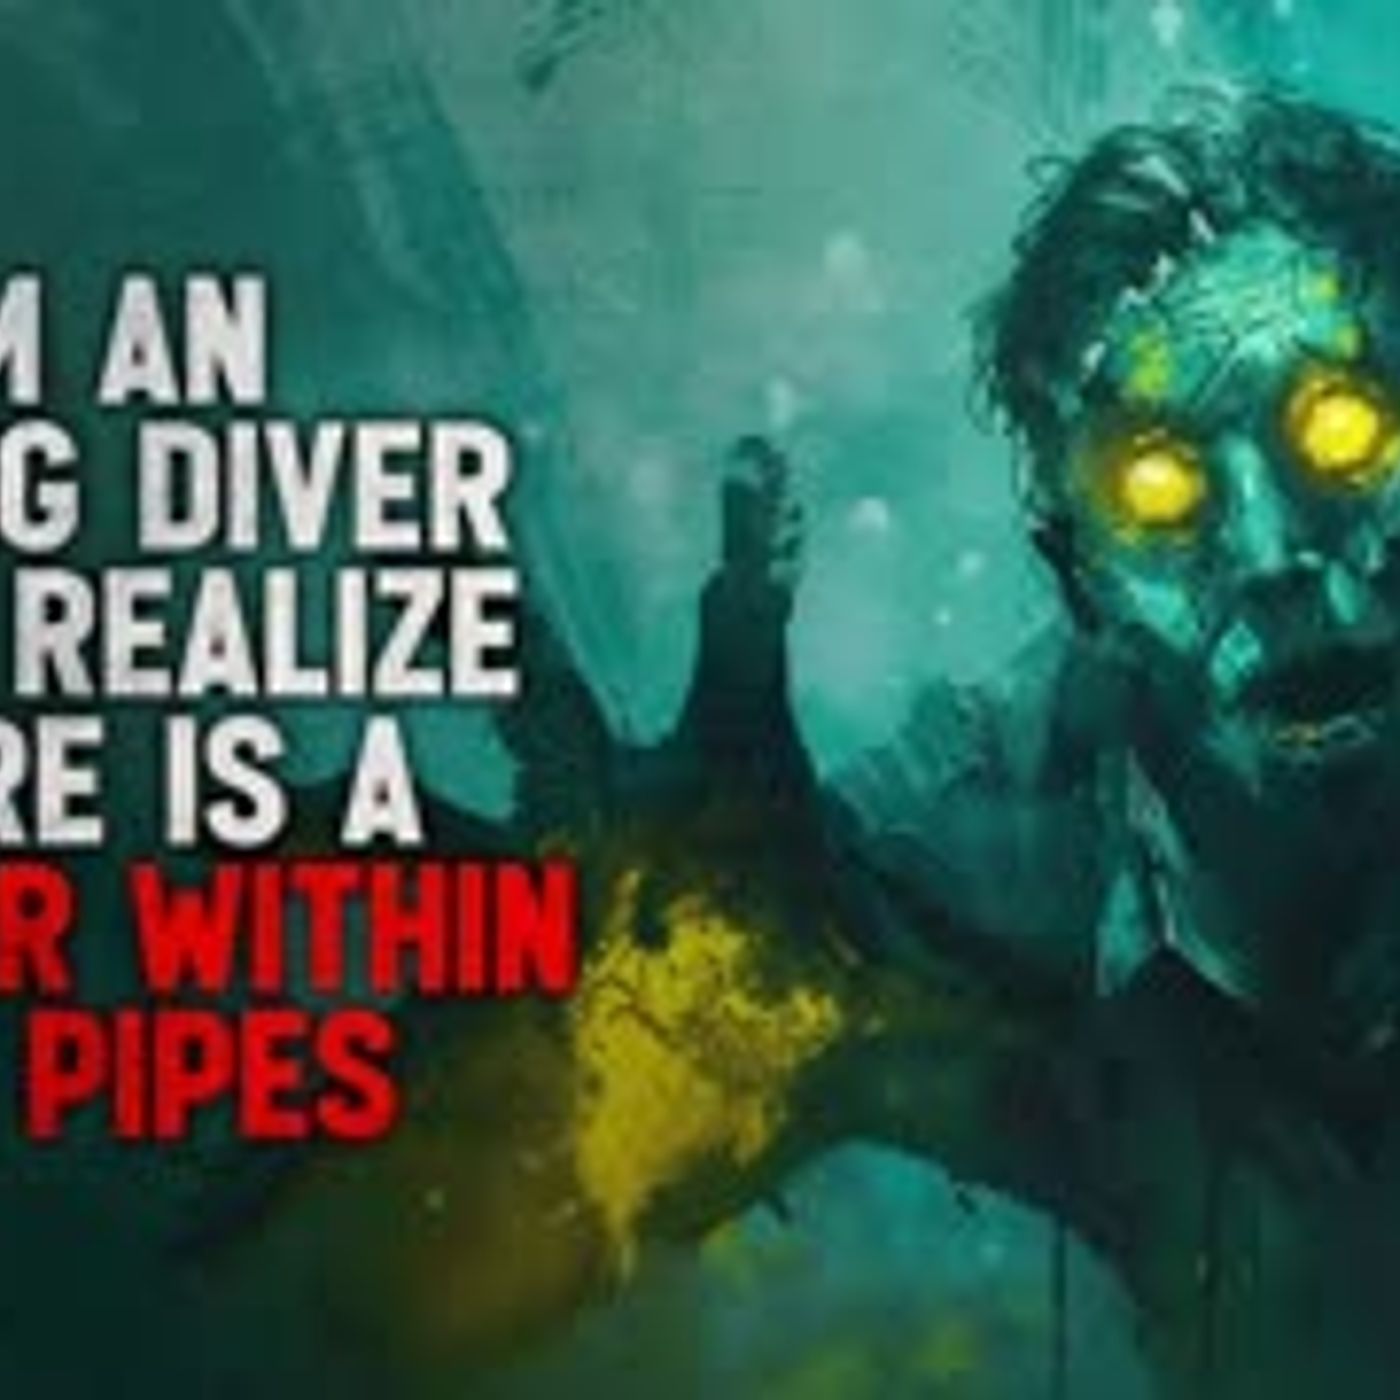 "I'm an Oil Rig Diver, and I Realize There is a Horror Within the Pipes" Creepypasta